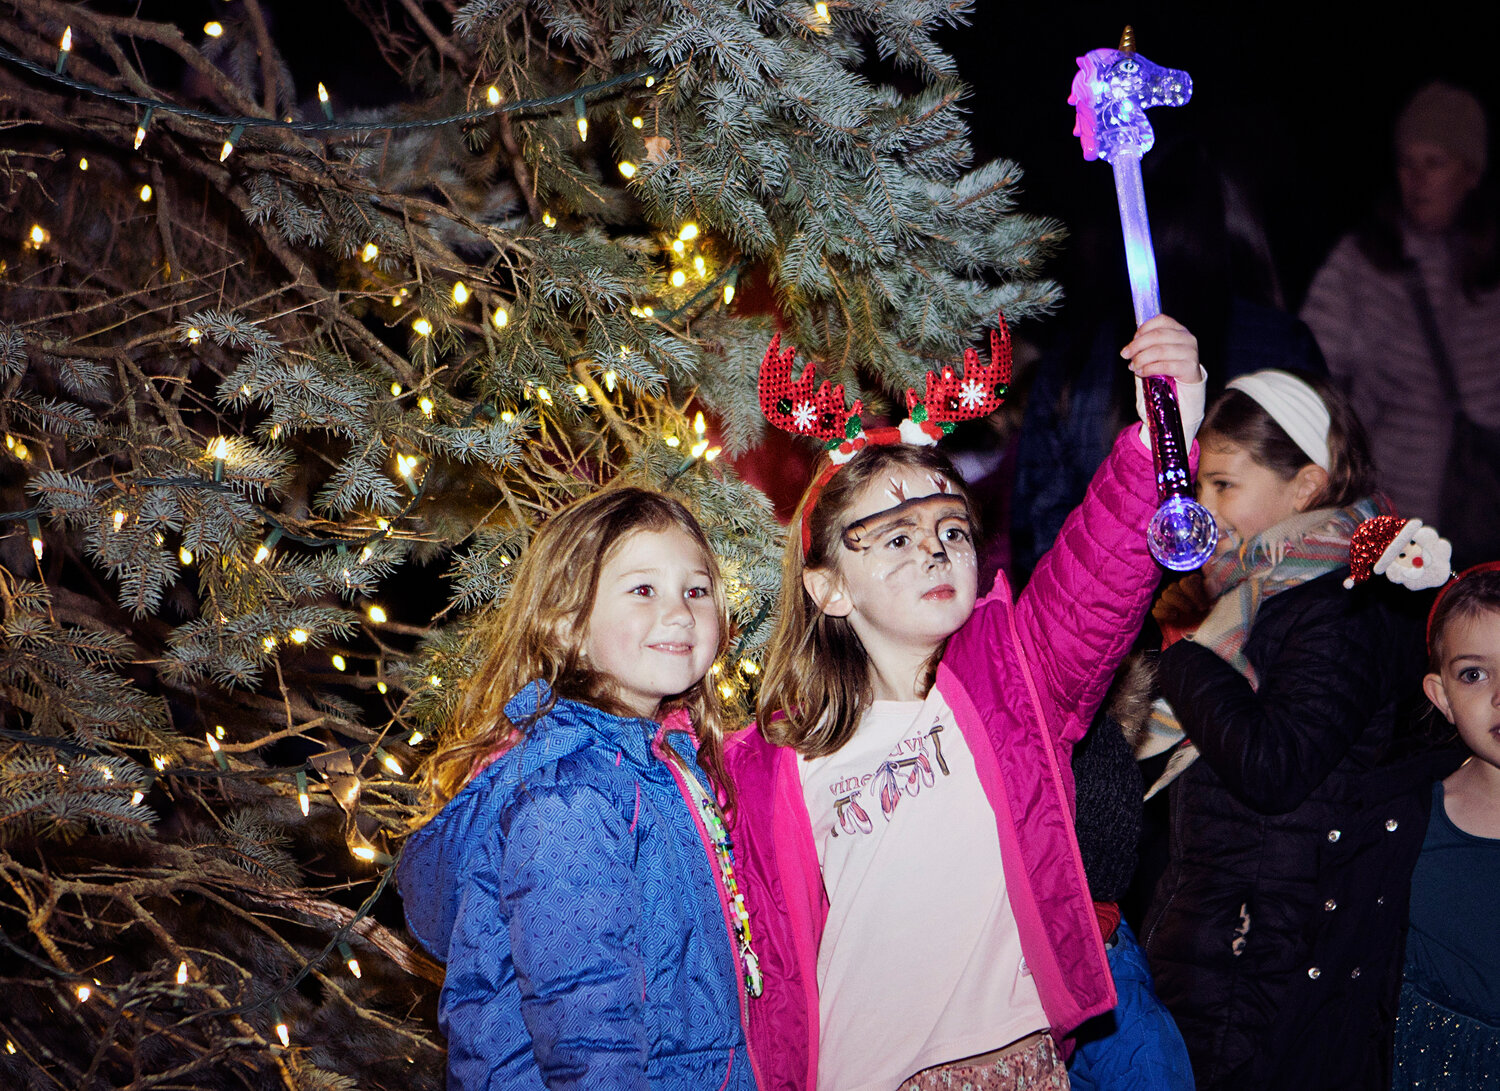 Madeline Miller (left) and Larkin Damell pose for a photo after the tree is lit.